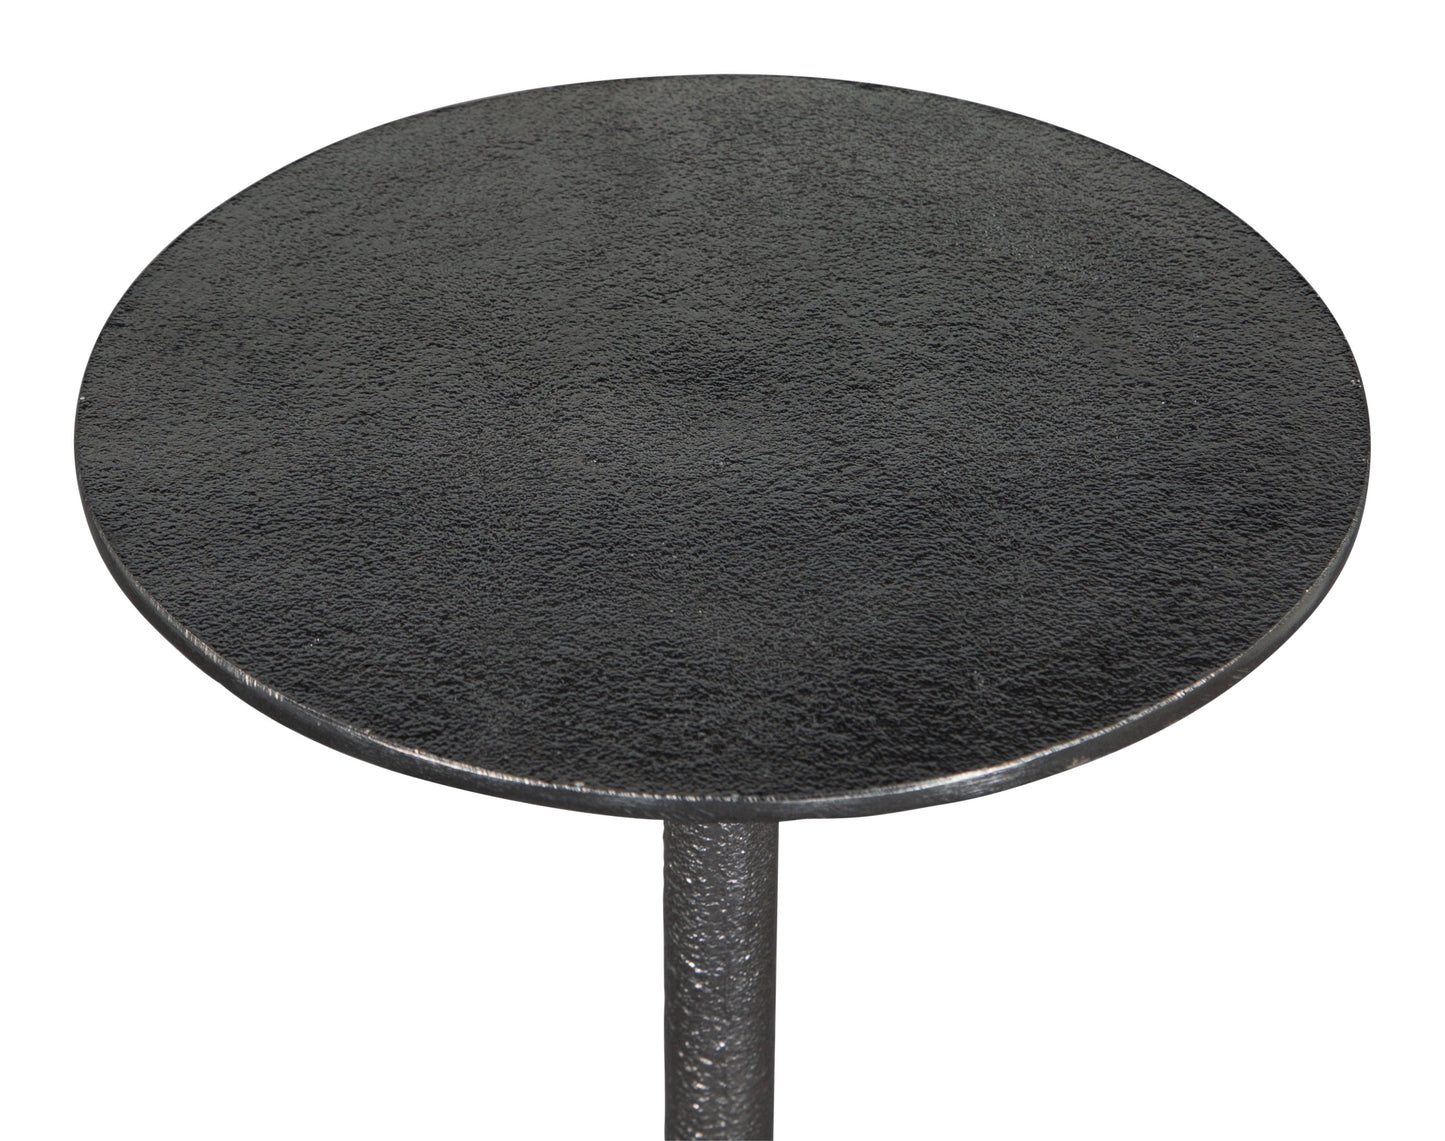 Table Top in Antique Black Finish